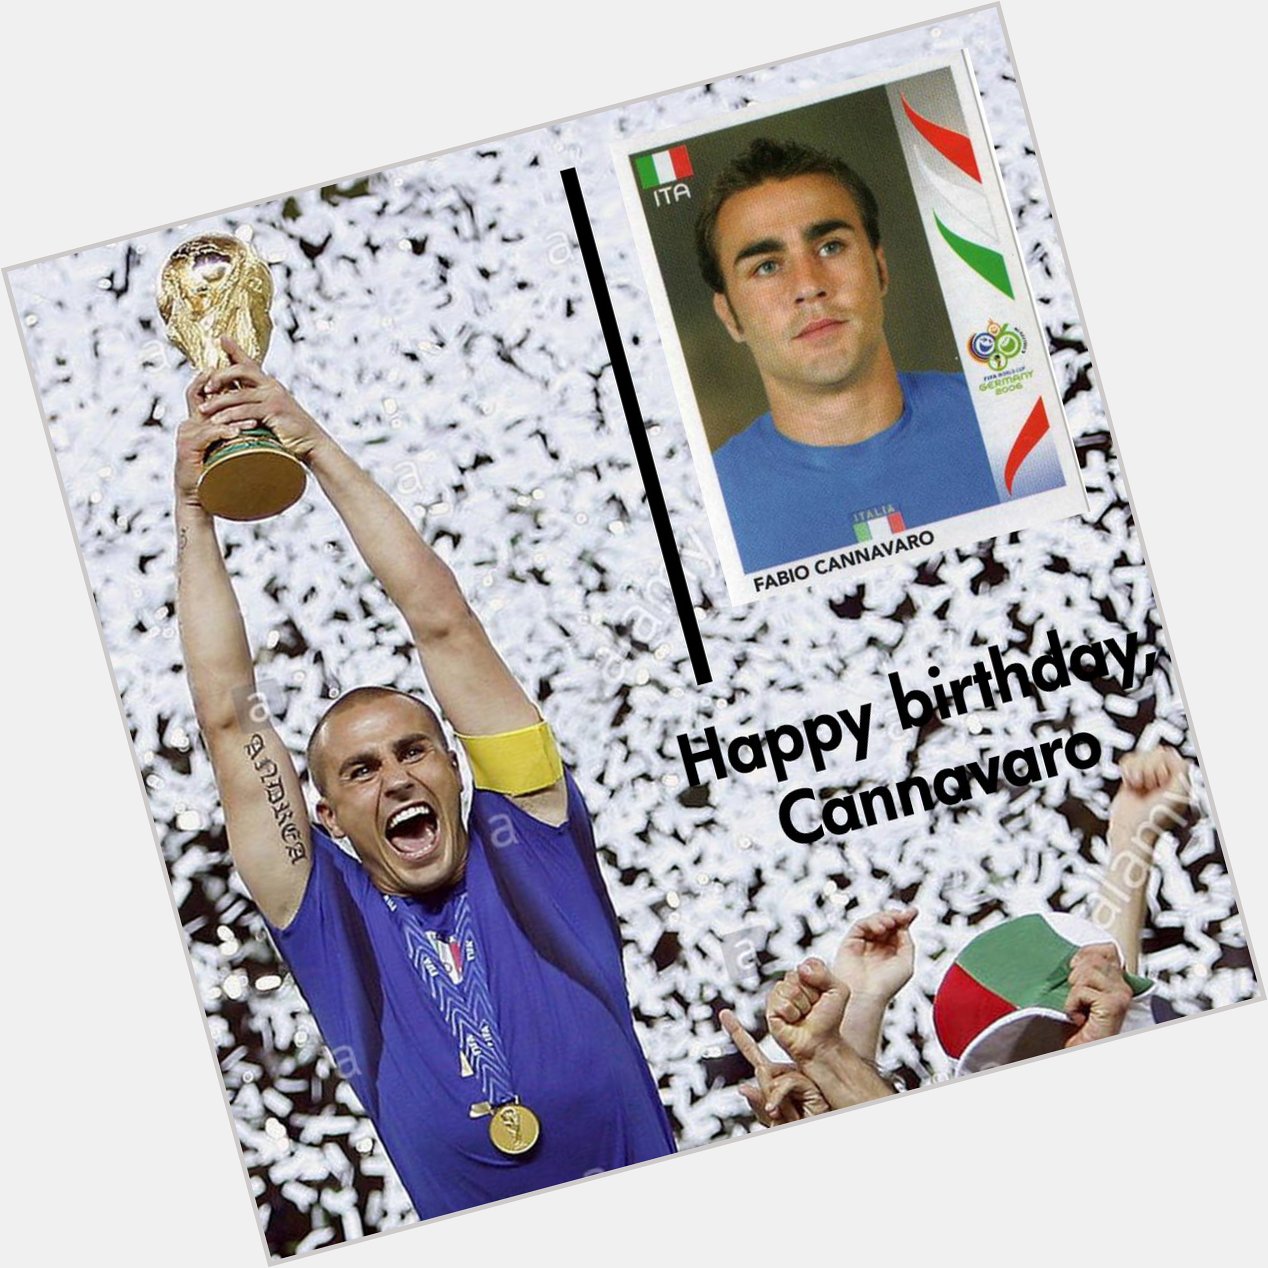 Happy birthday to Fabio Cannavaro!!! Which moment of him is your favorite? 